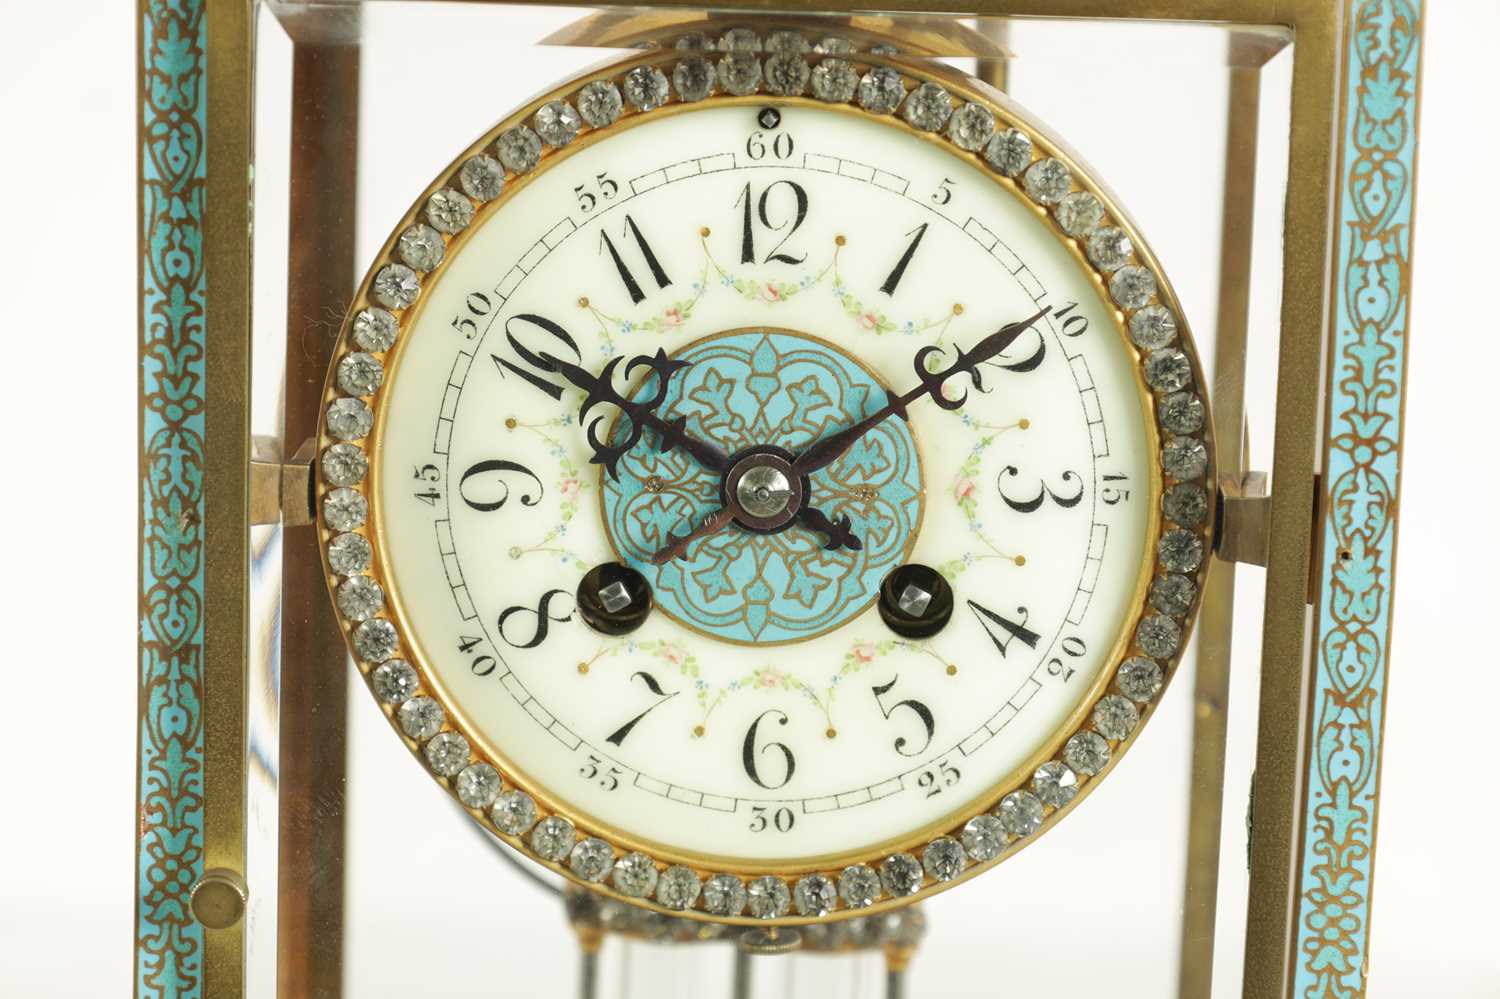 A LATE 19TH CENTURY FRENCH BRASS AND CHAMPLEVE ENAMEL FOUR-GLASS MANTEL CLOCK - Image 2 of 10